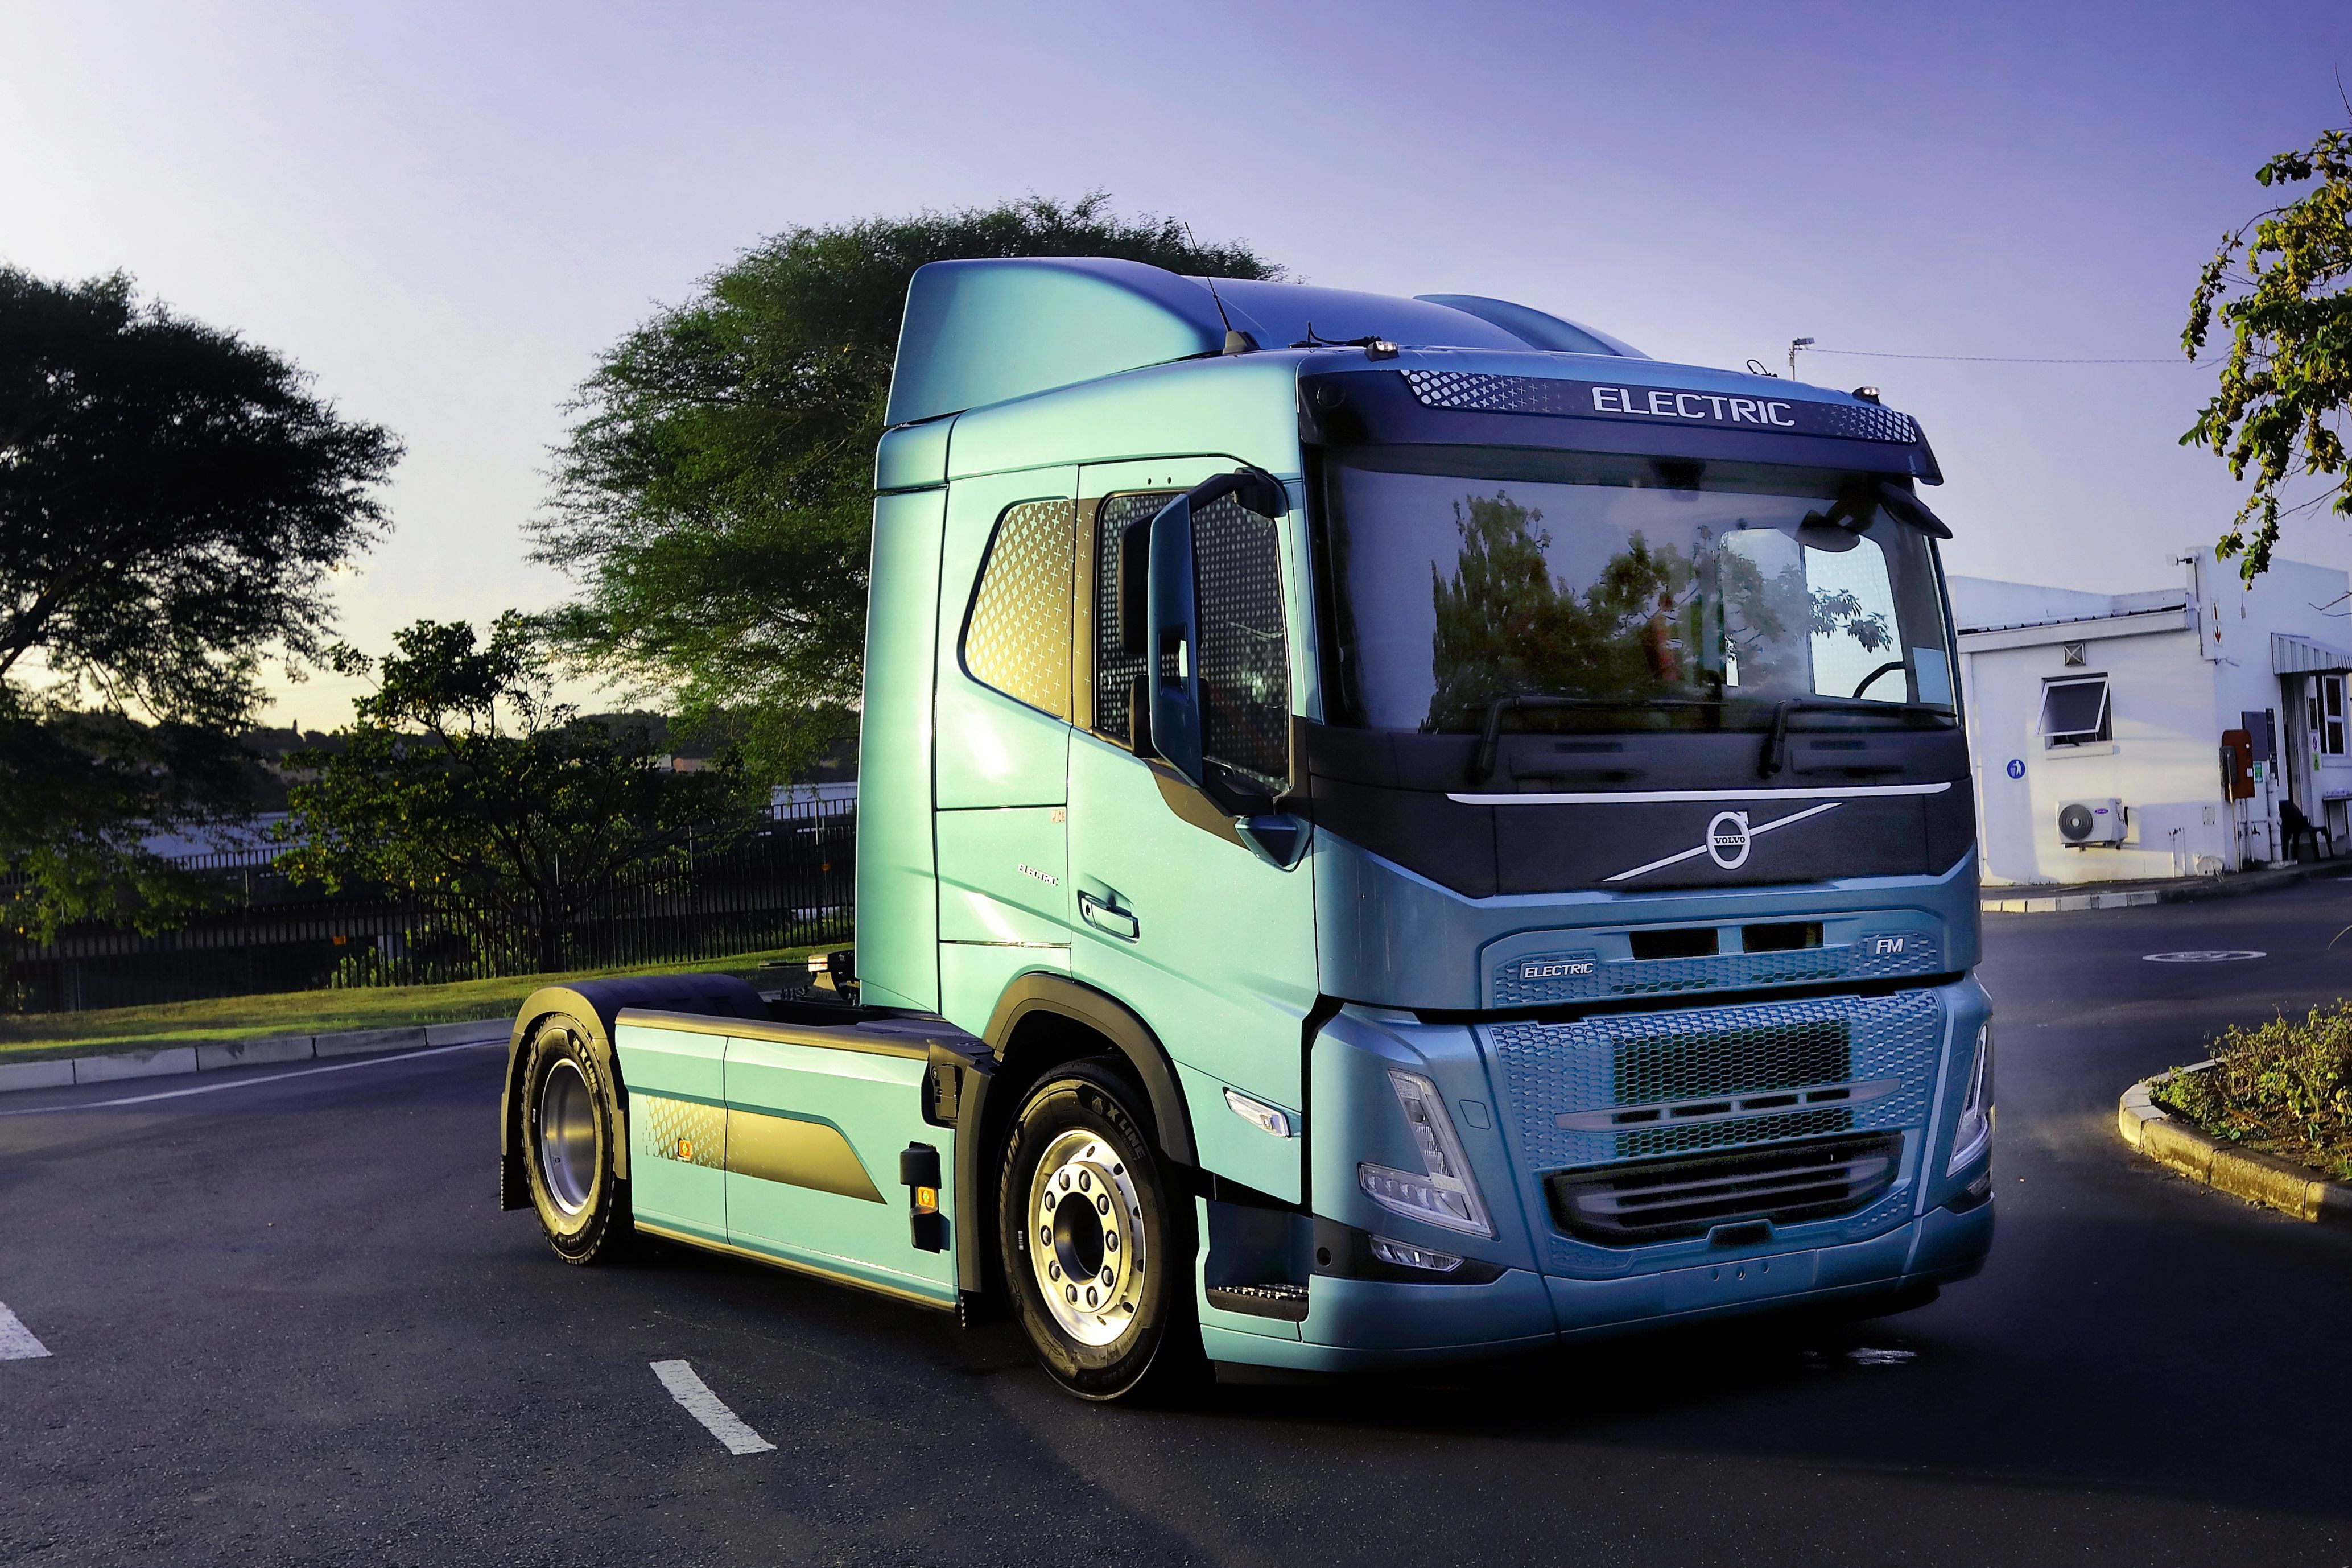 Colin-on-Cars - Electric Volvo truck on the road